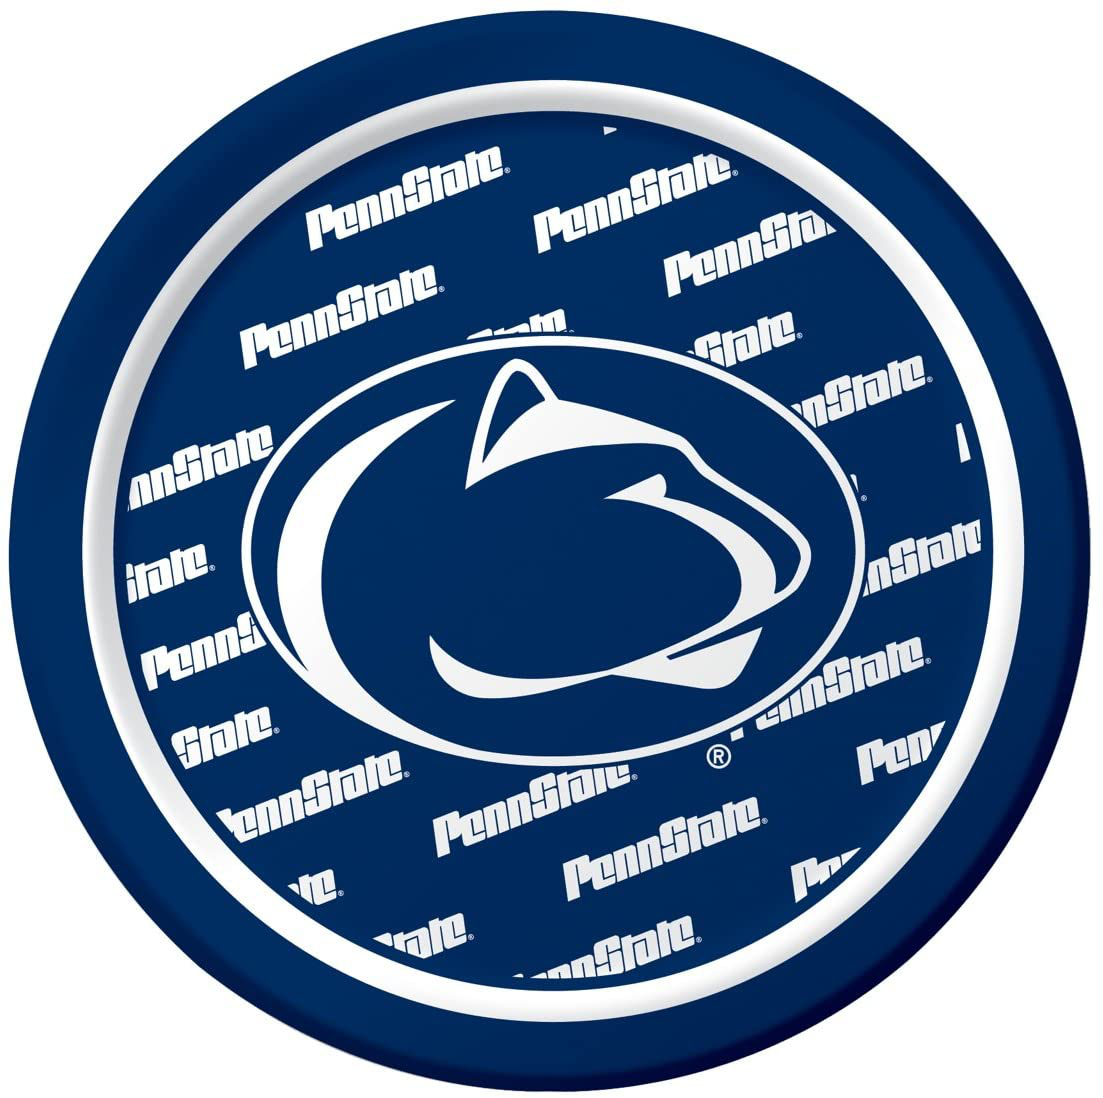 8-Count Sturdy Style Paper Dessert Plates, Penn State Nittany Lions